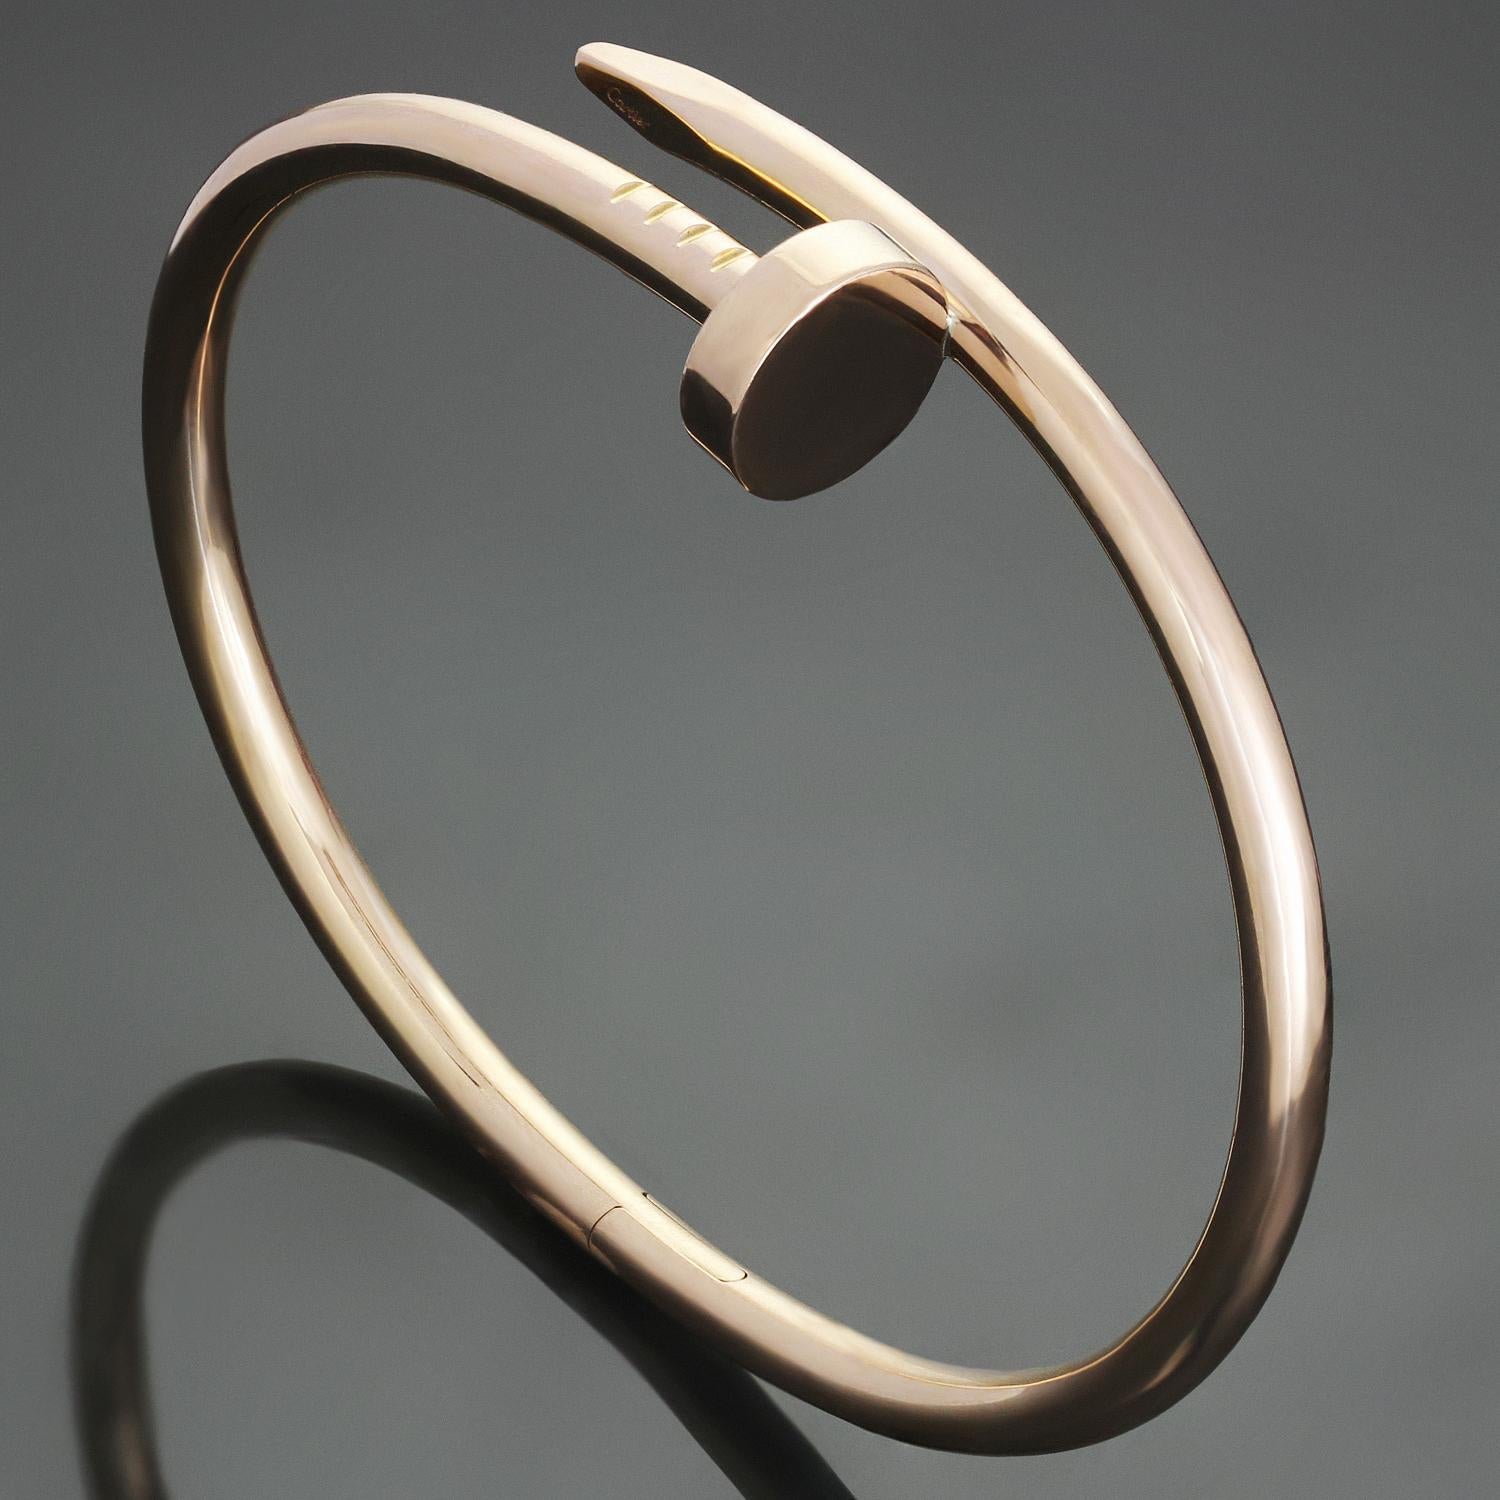 This elegant hinged bracelet from Cartier's iconic Juste Un Clou collection is crafted in 18k rose gold. This bangle is a size 17. Made in France circa 2017. Excellent condition. Comes with original pouch and paperwork.